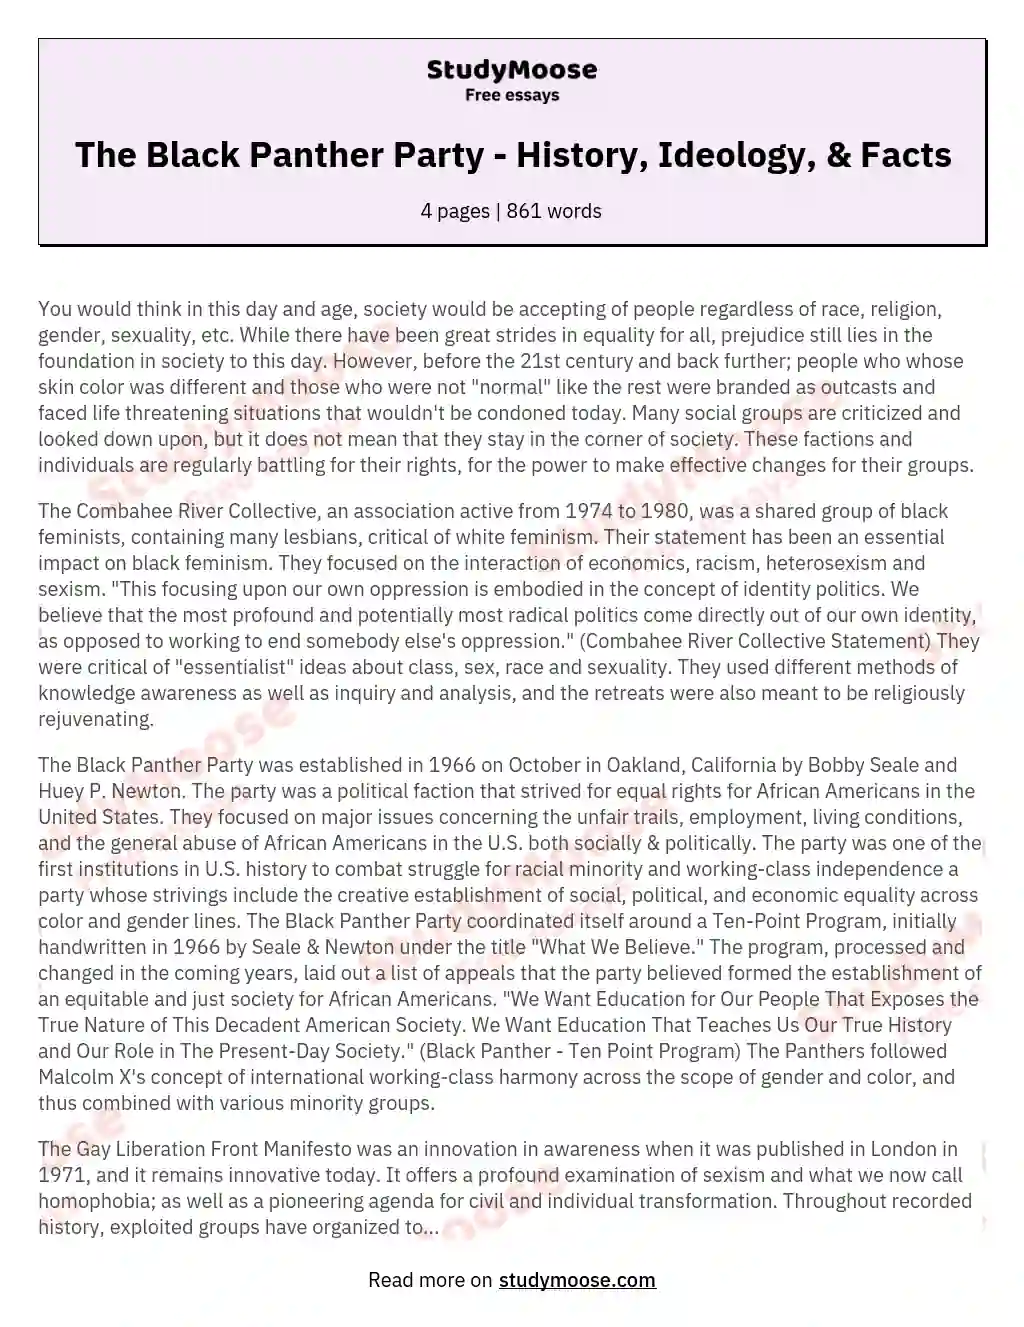 The Black Panther Party - History, Ideology, & Facts essay